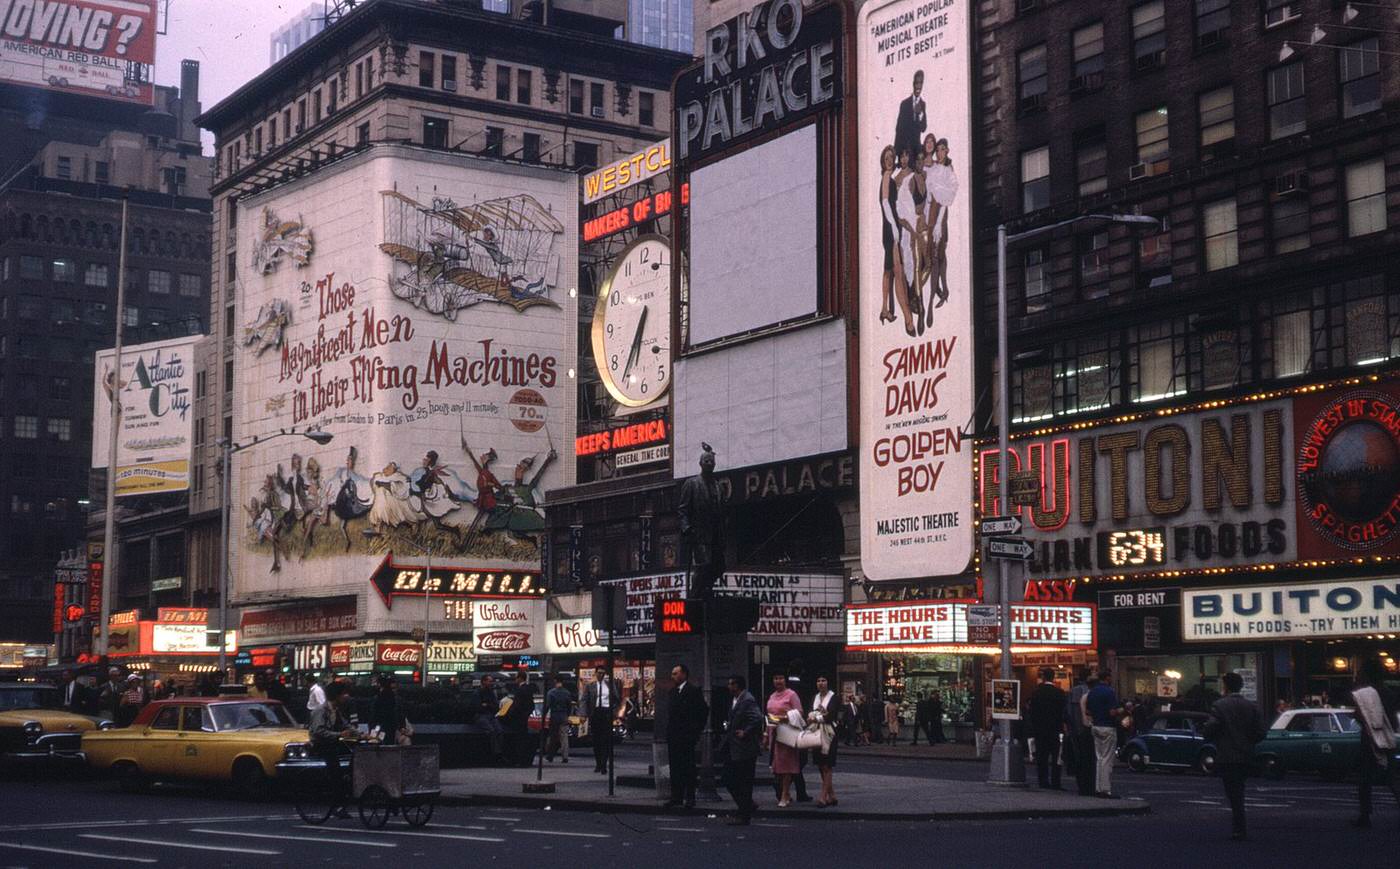 RKO PALACE 46th and 7th Ave Signs Magnificent men F, 1965